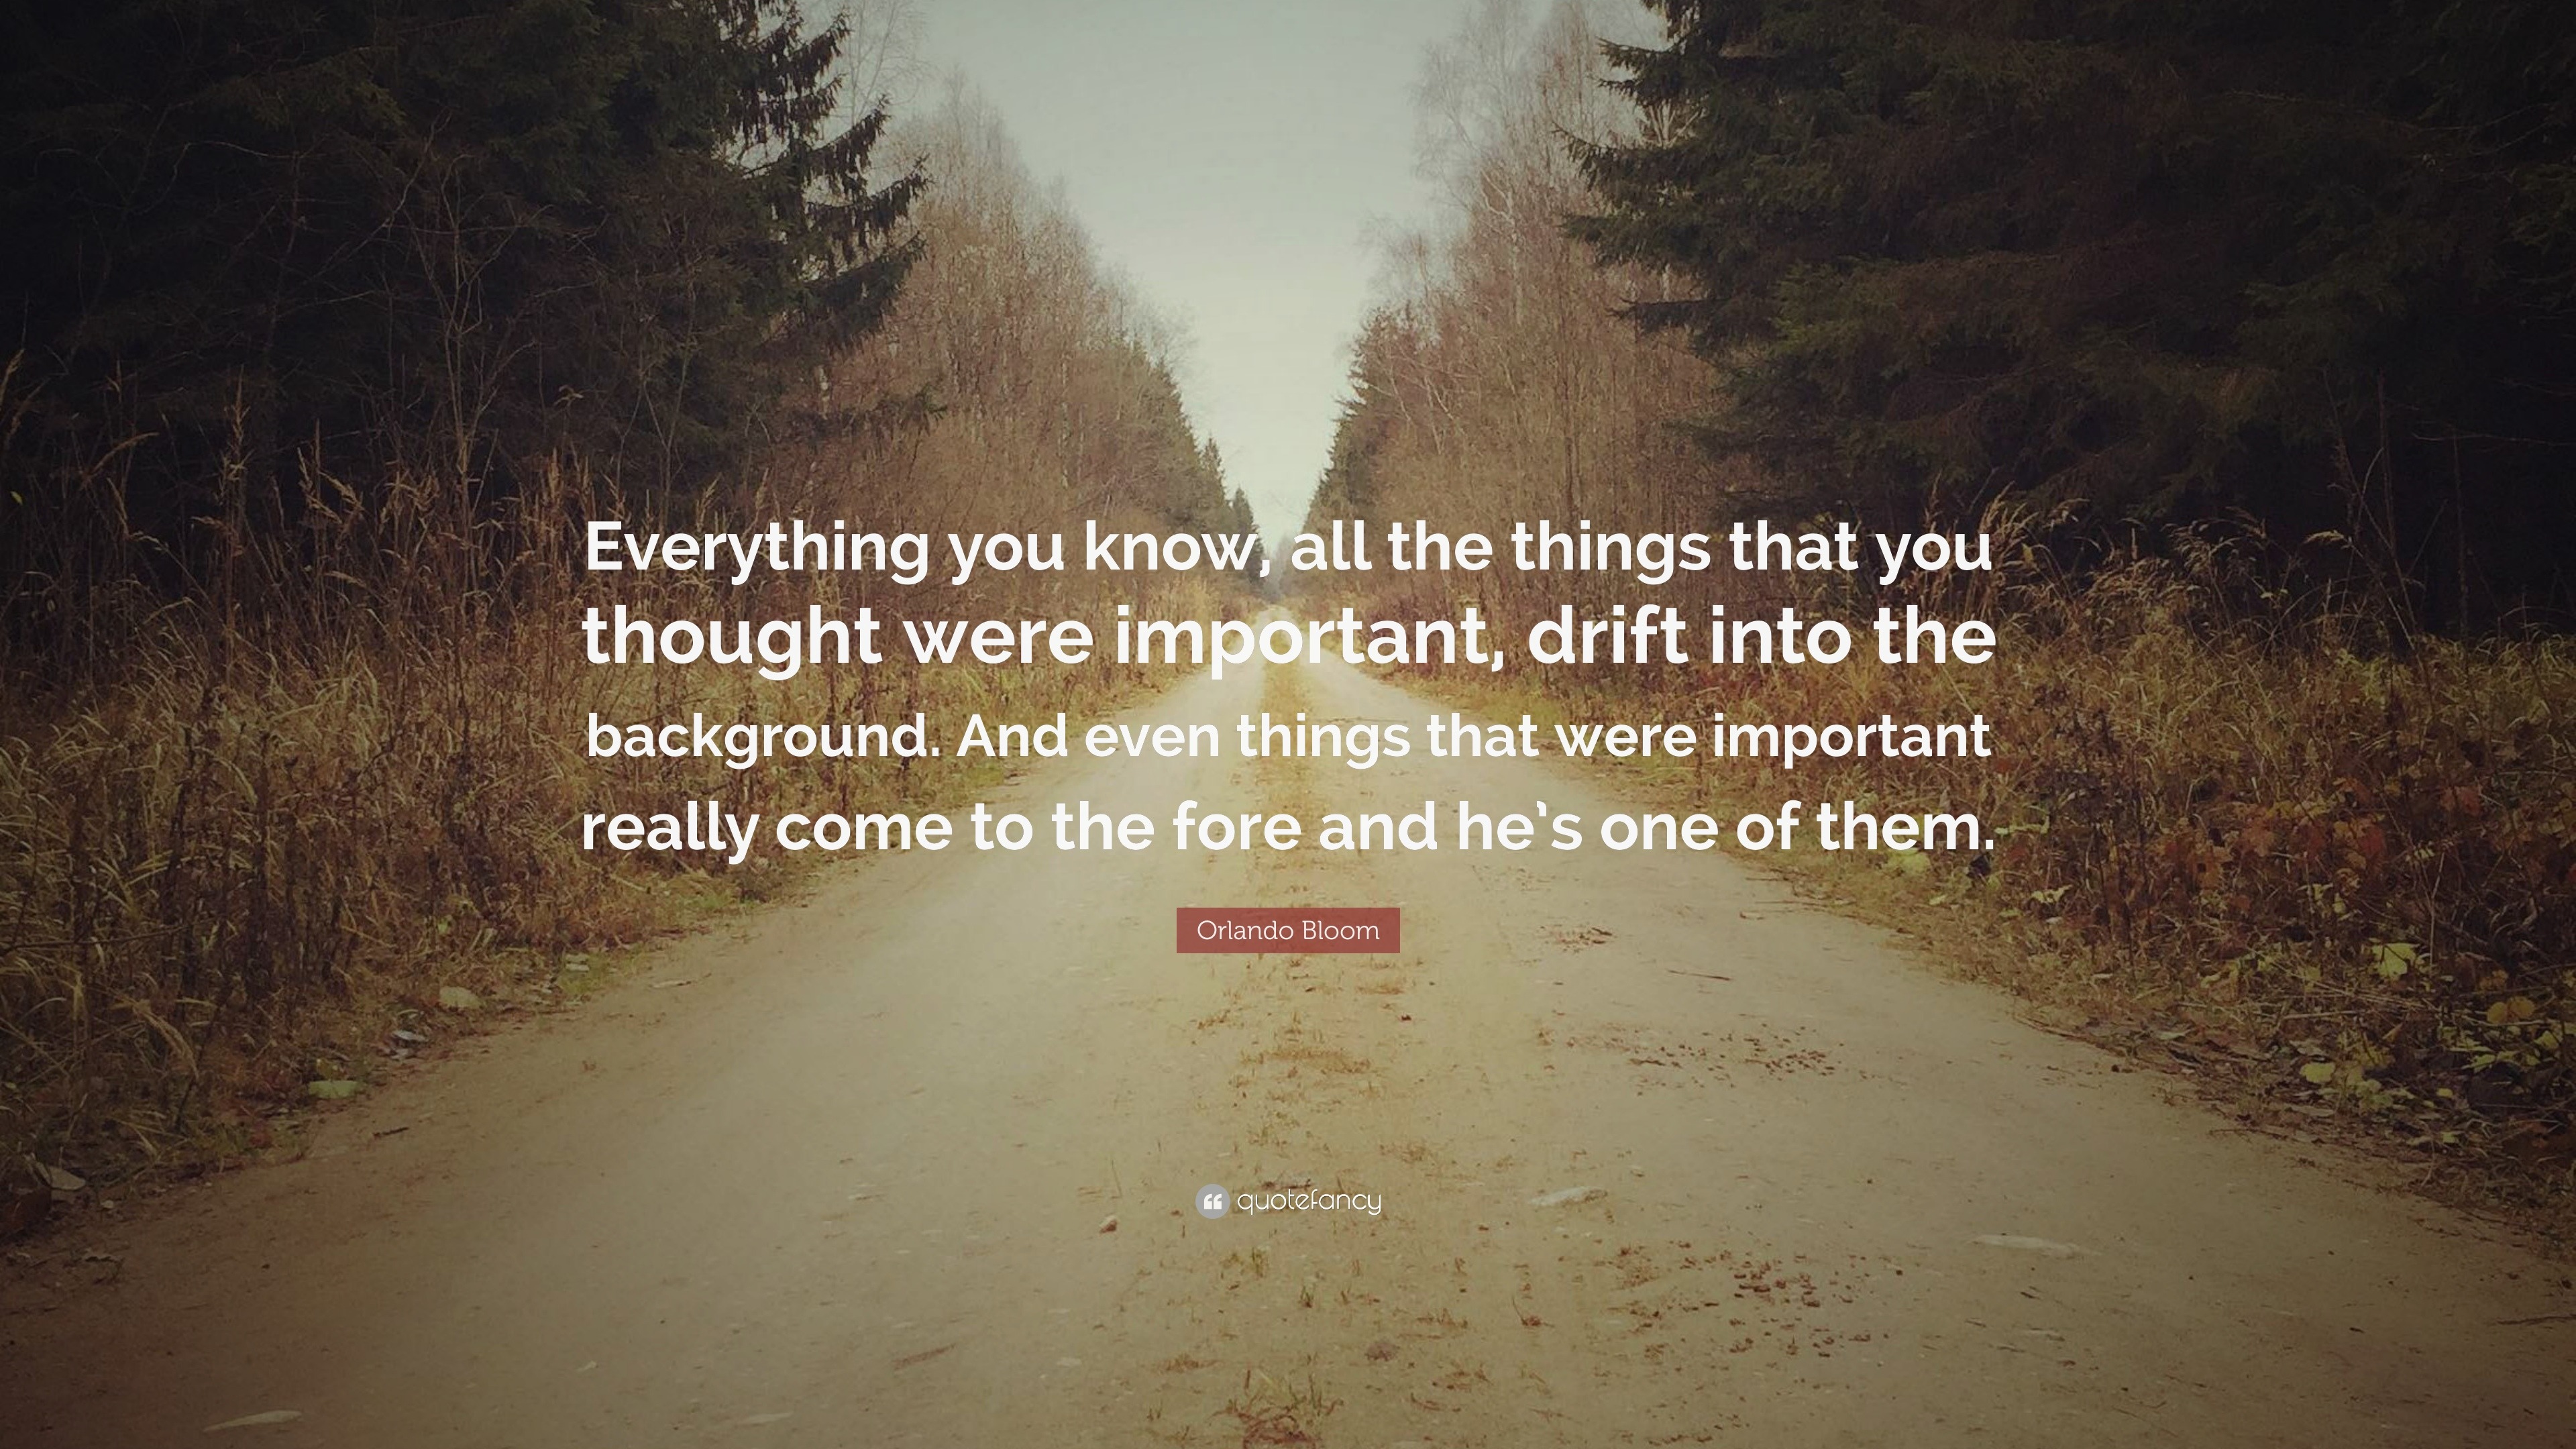 Orlando Bloom Quote: “Everything you know, all the things that you thought  were important, drift into the background. And even things that wer...”